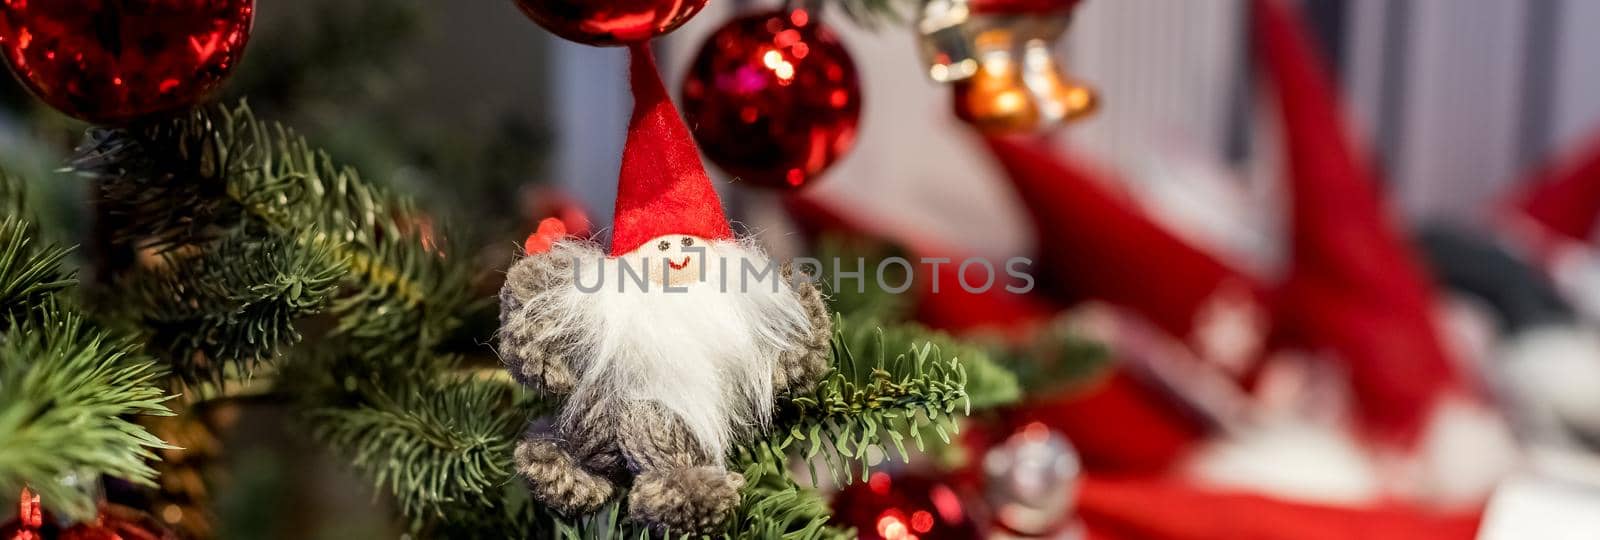 Christmas tree with colorful toys in the interior. Traditional christmas tree Panoramic web banner size. Selective focus.Winter festive concept. New Year decor with vintage ornaments.Copy space by YuliaYaspe1979